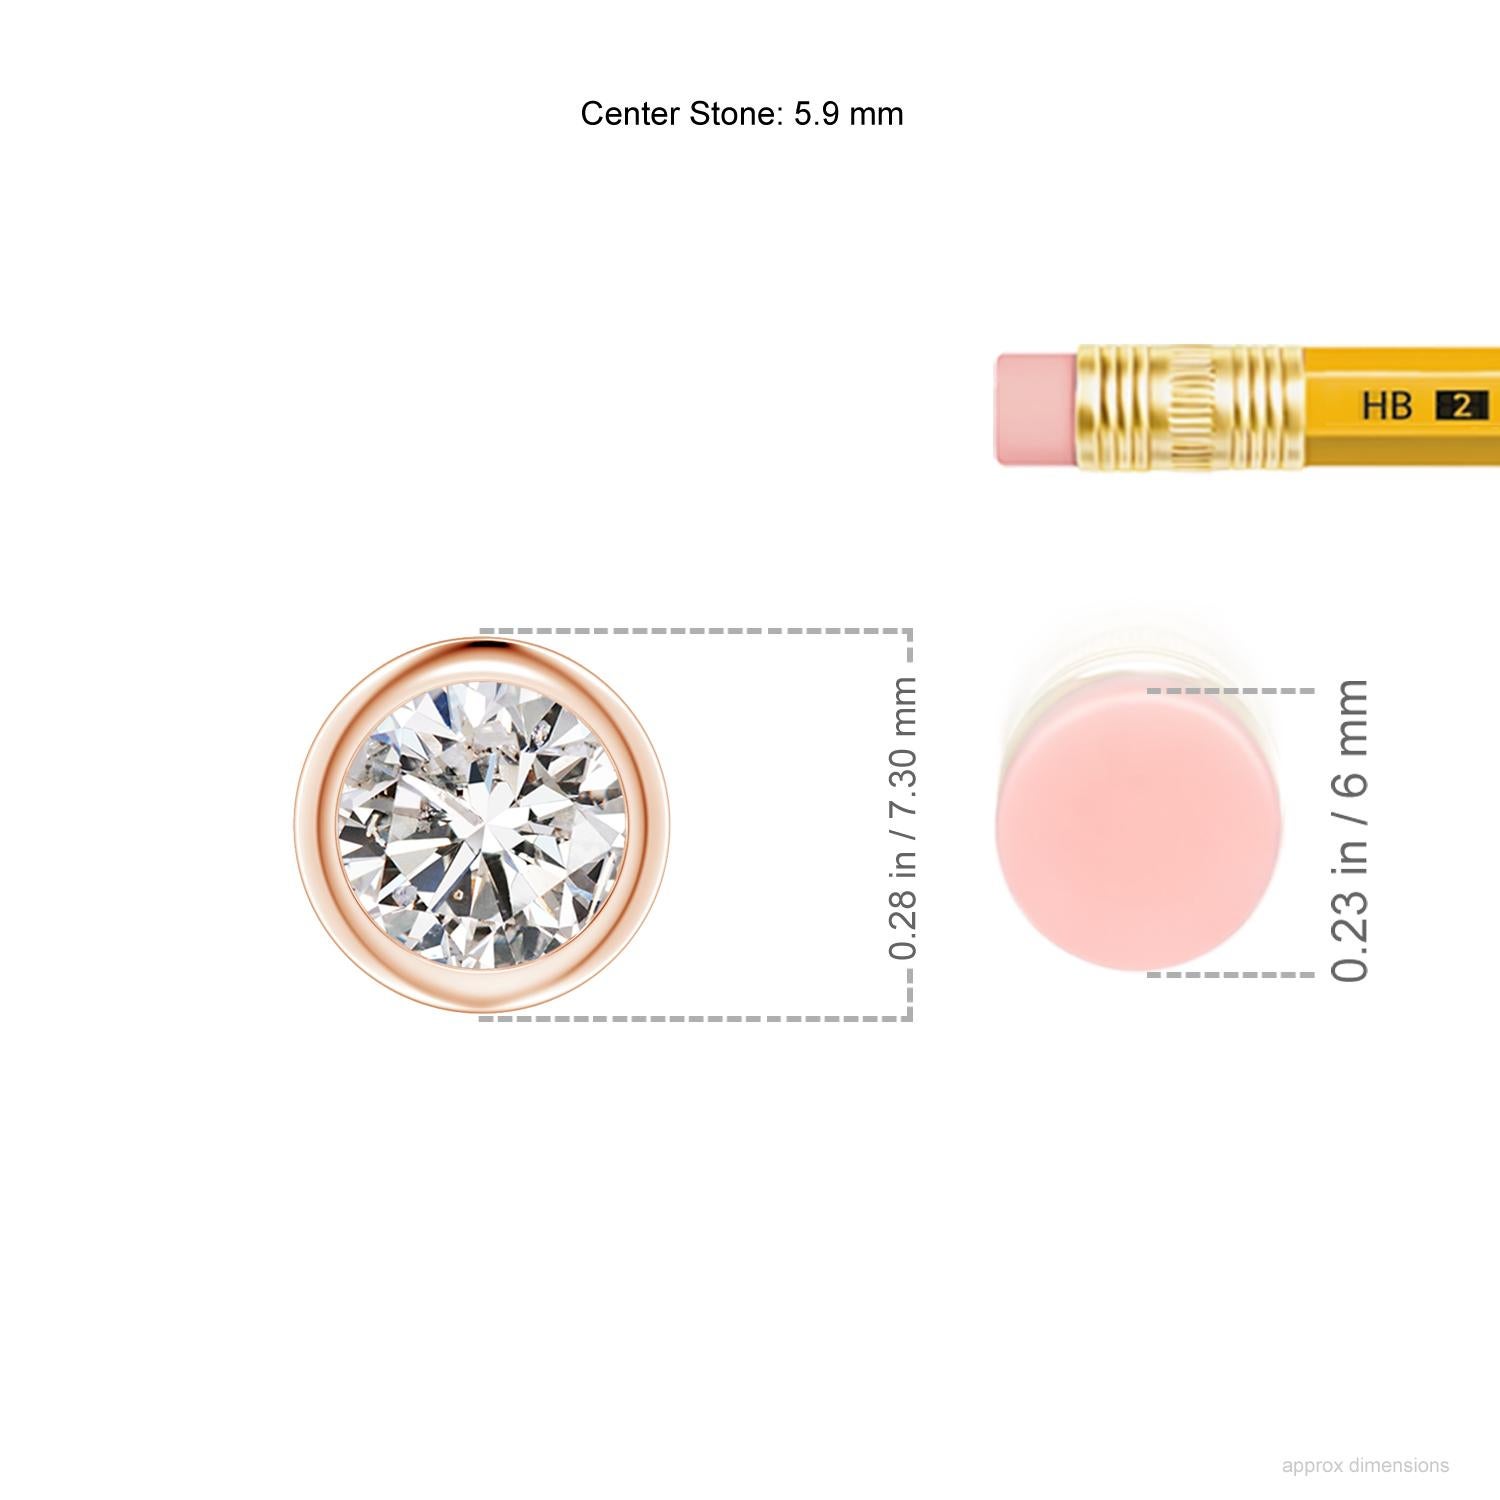 This classic solitaire diamond pendant's beautiful design makes the center stone appear like it's floating on the chain. The sparkling diamond is secured in a bezel setting. Crafted in 14k rose gold, this round diamond pendant makes an elegant style